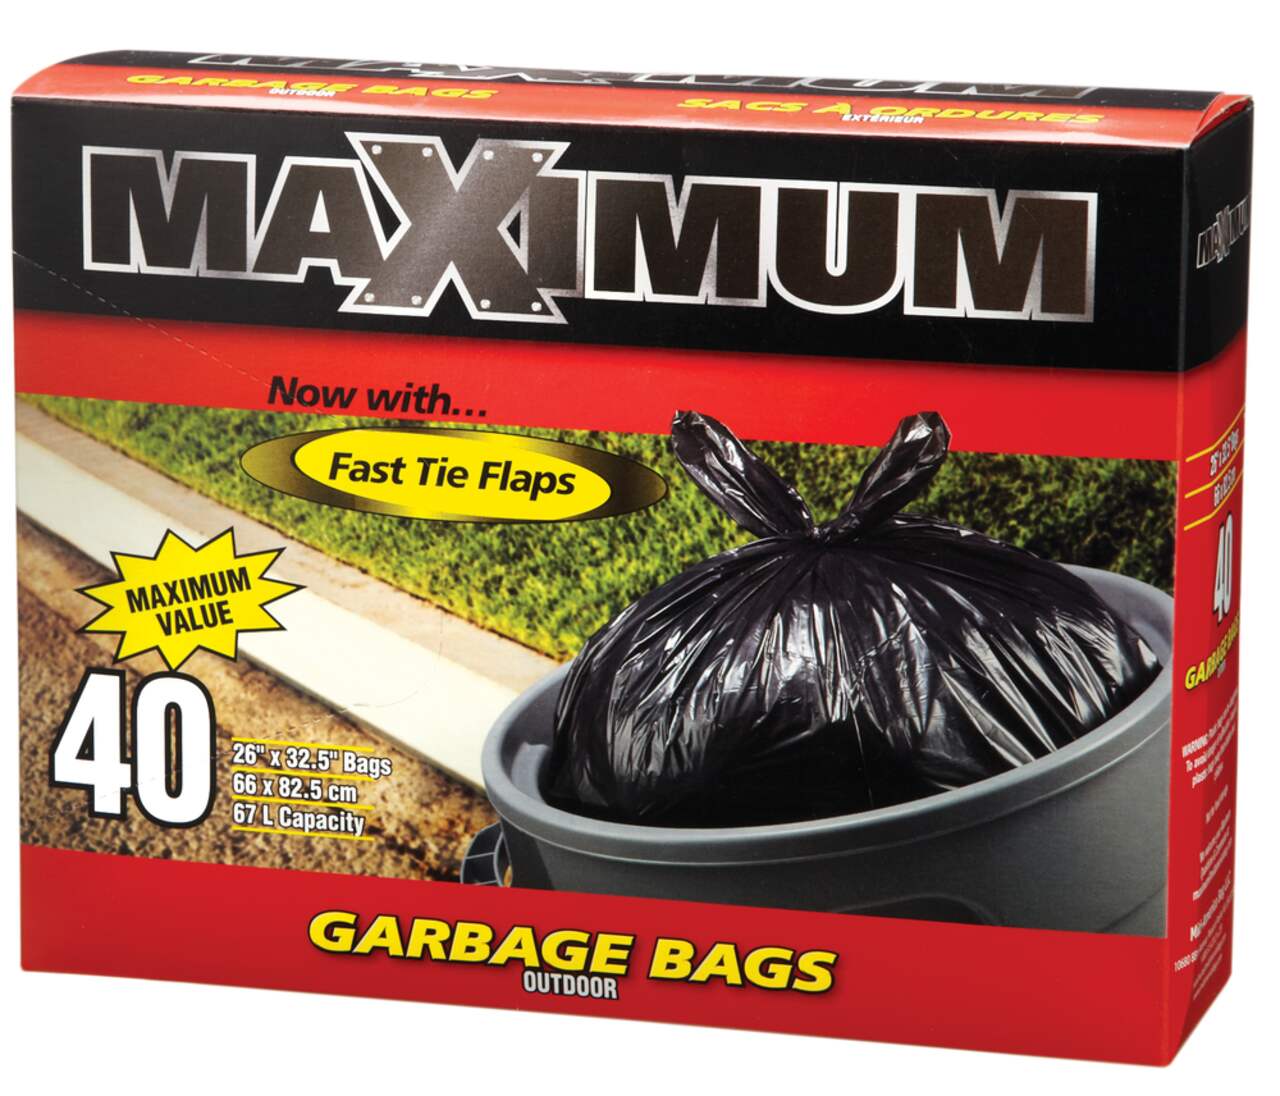 https://media-www.canadiantire.ca/product/living/cleaning/refuse-bags/1990241/maximum-garbage-bags-40-count-083d5db1-ef27-466d-bc22-ab44bfe5a9f9.png?imdensity=1&imwidth=640&impolicy=mZoom